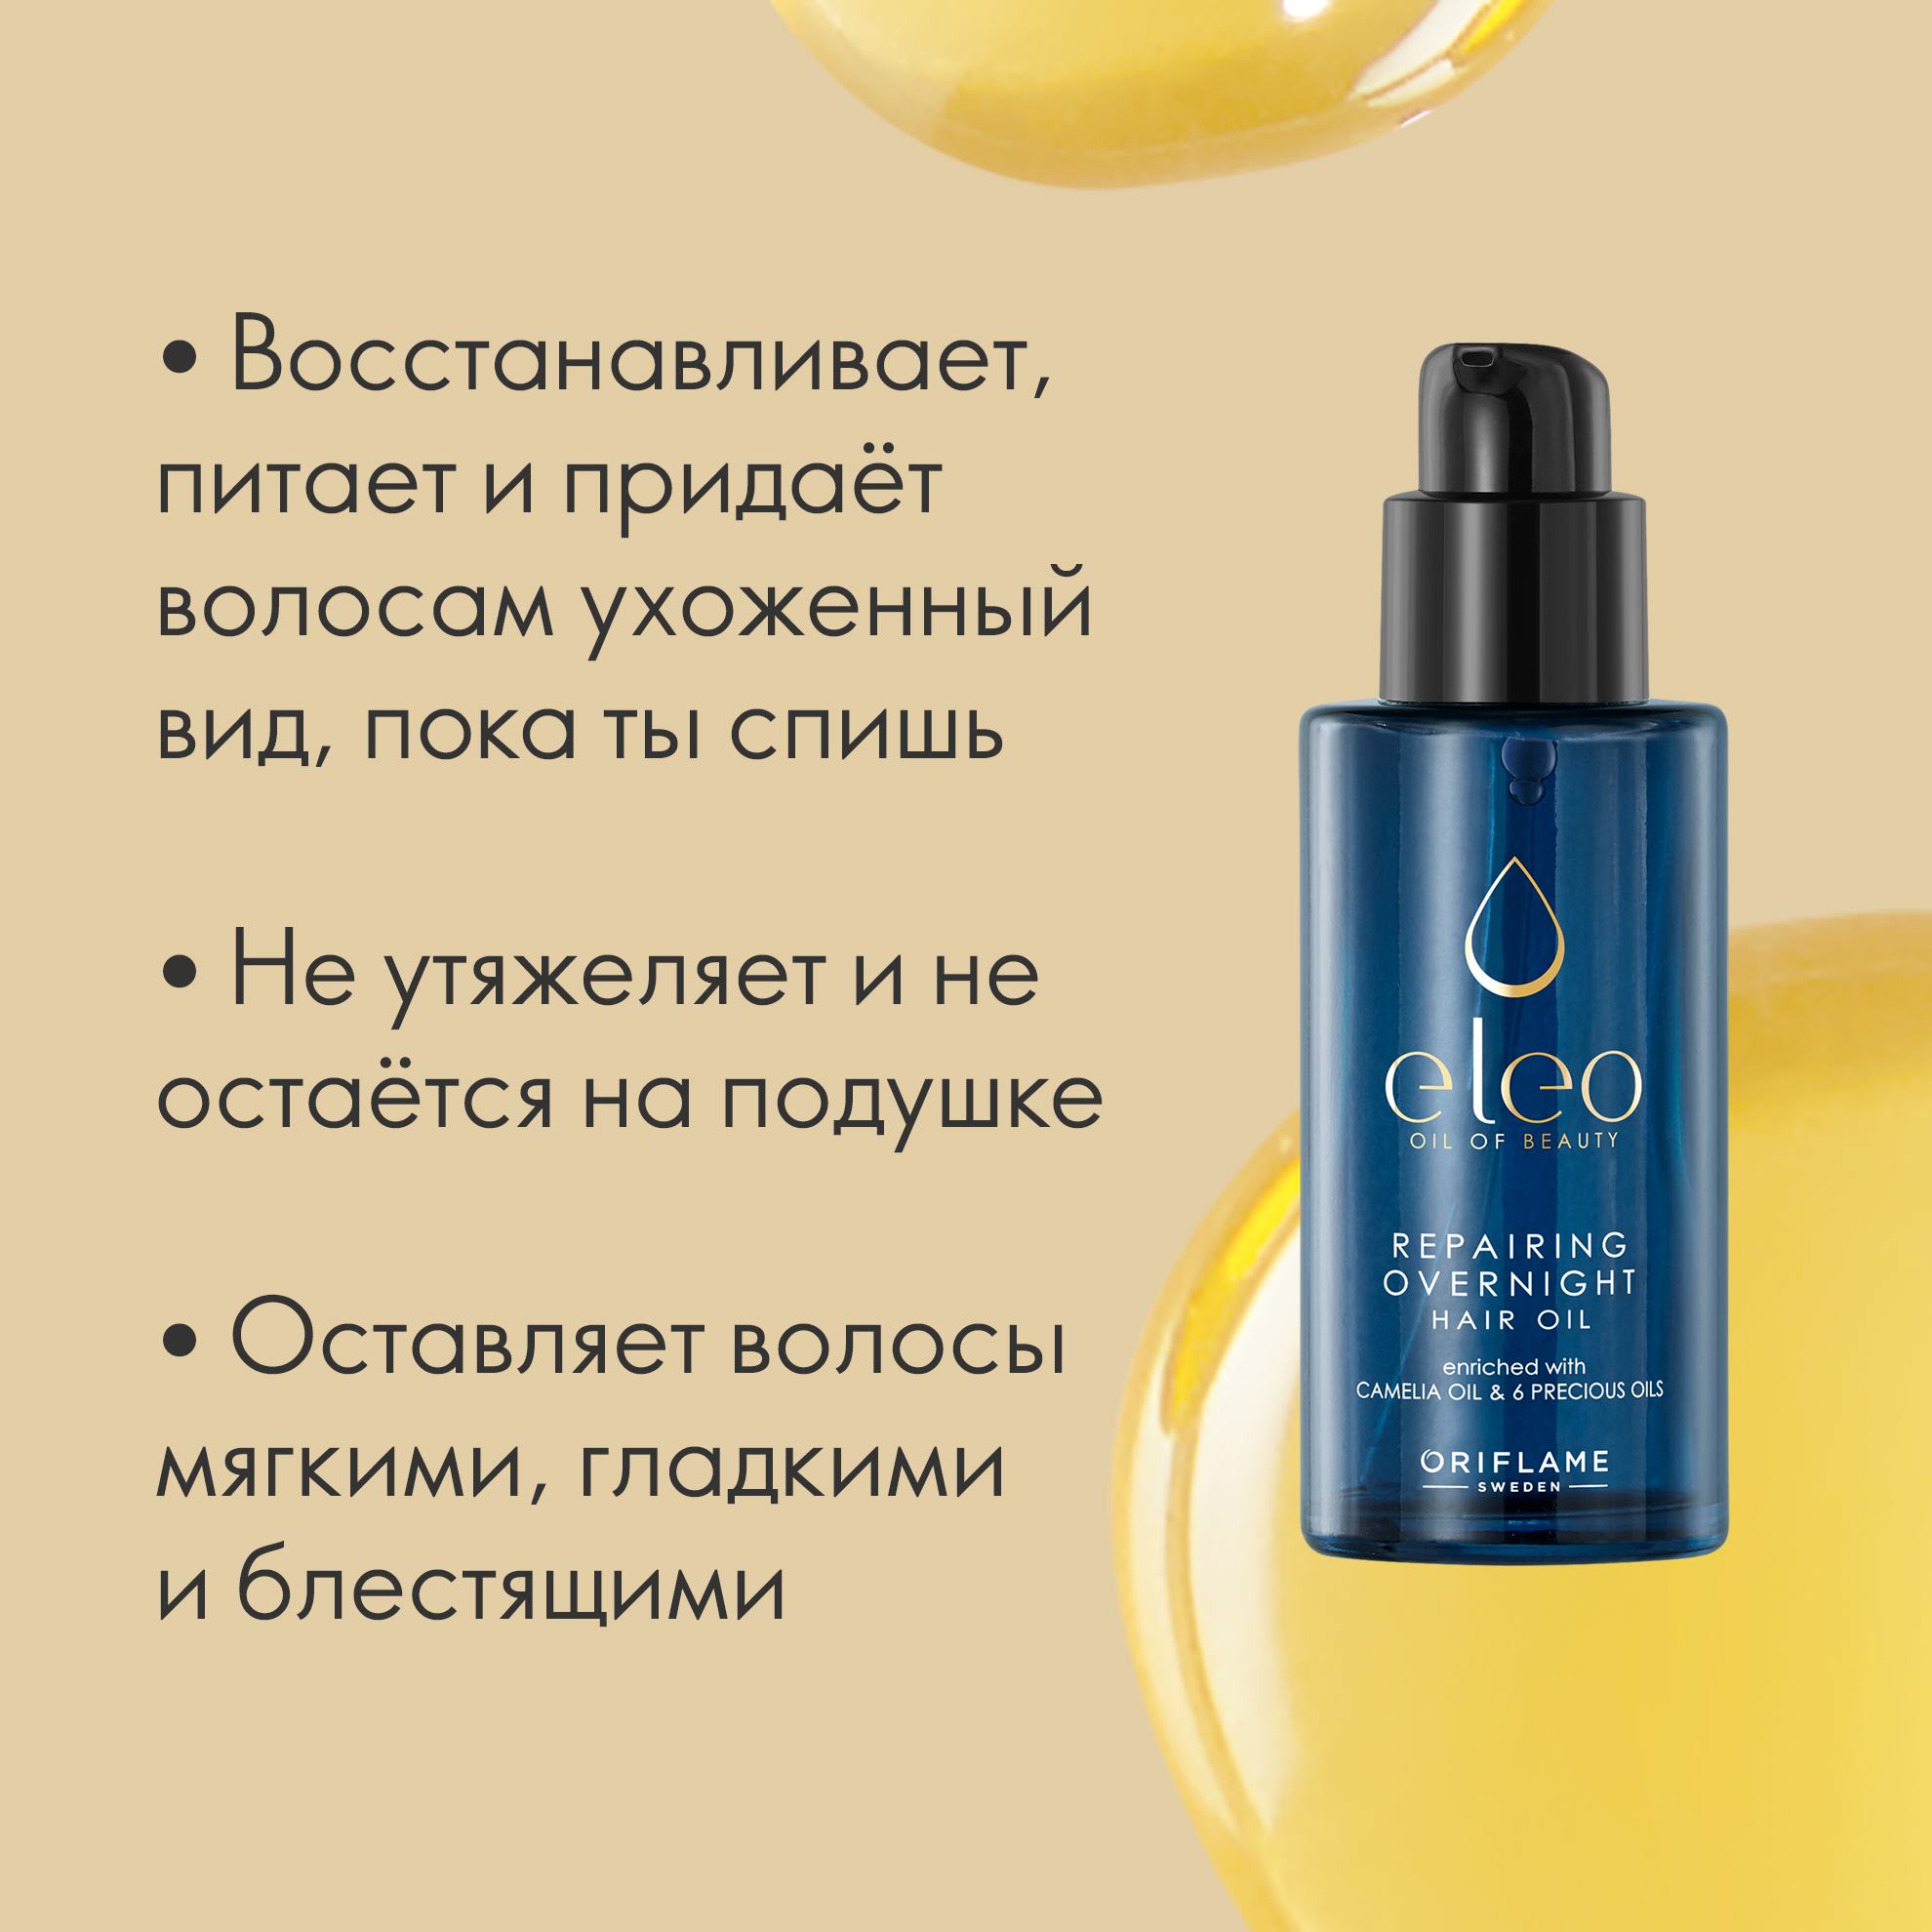 https://media-cdn.oriflame.com/productImage?externalMediaId=product-management-media%2fProducts%2f38602%2fRU%2f38602_3.png&id=15404497&version=1